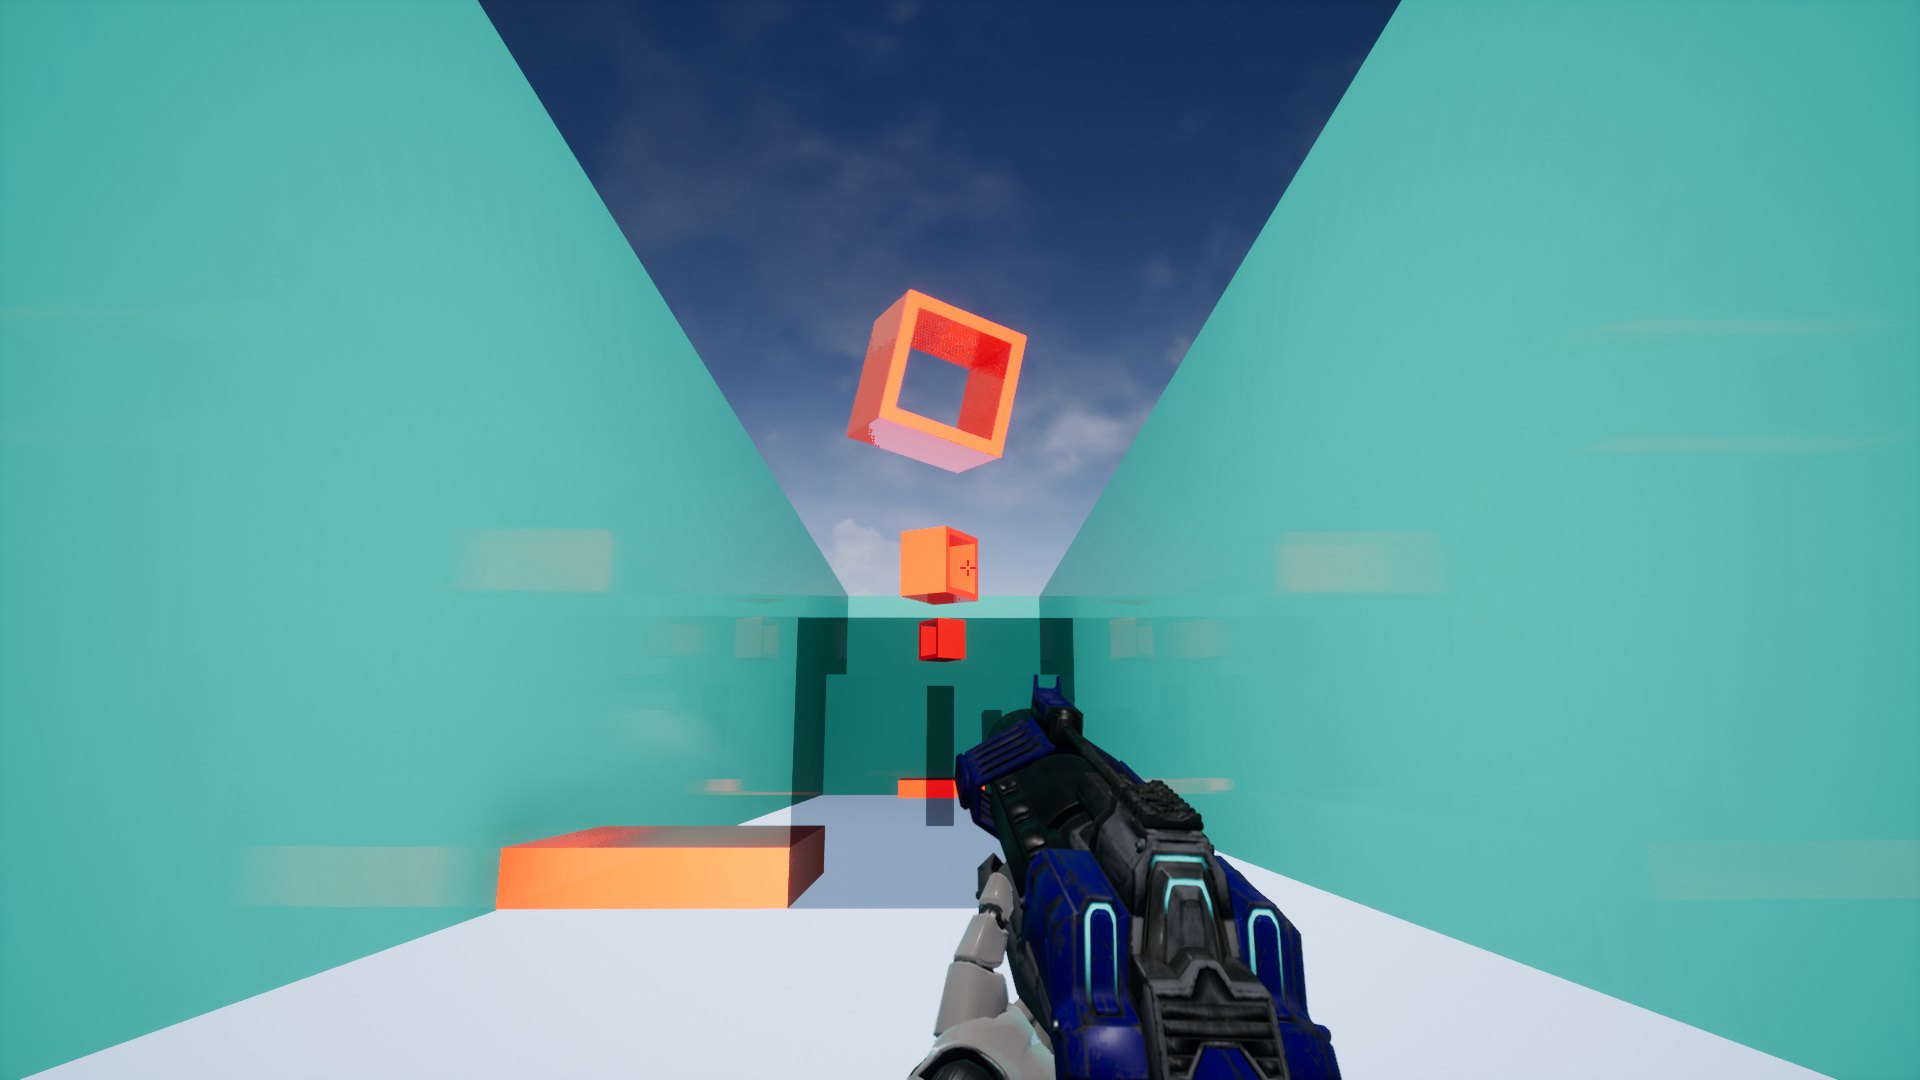 FPS - Fun Puzzle Shooter Steam CD Key